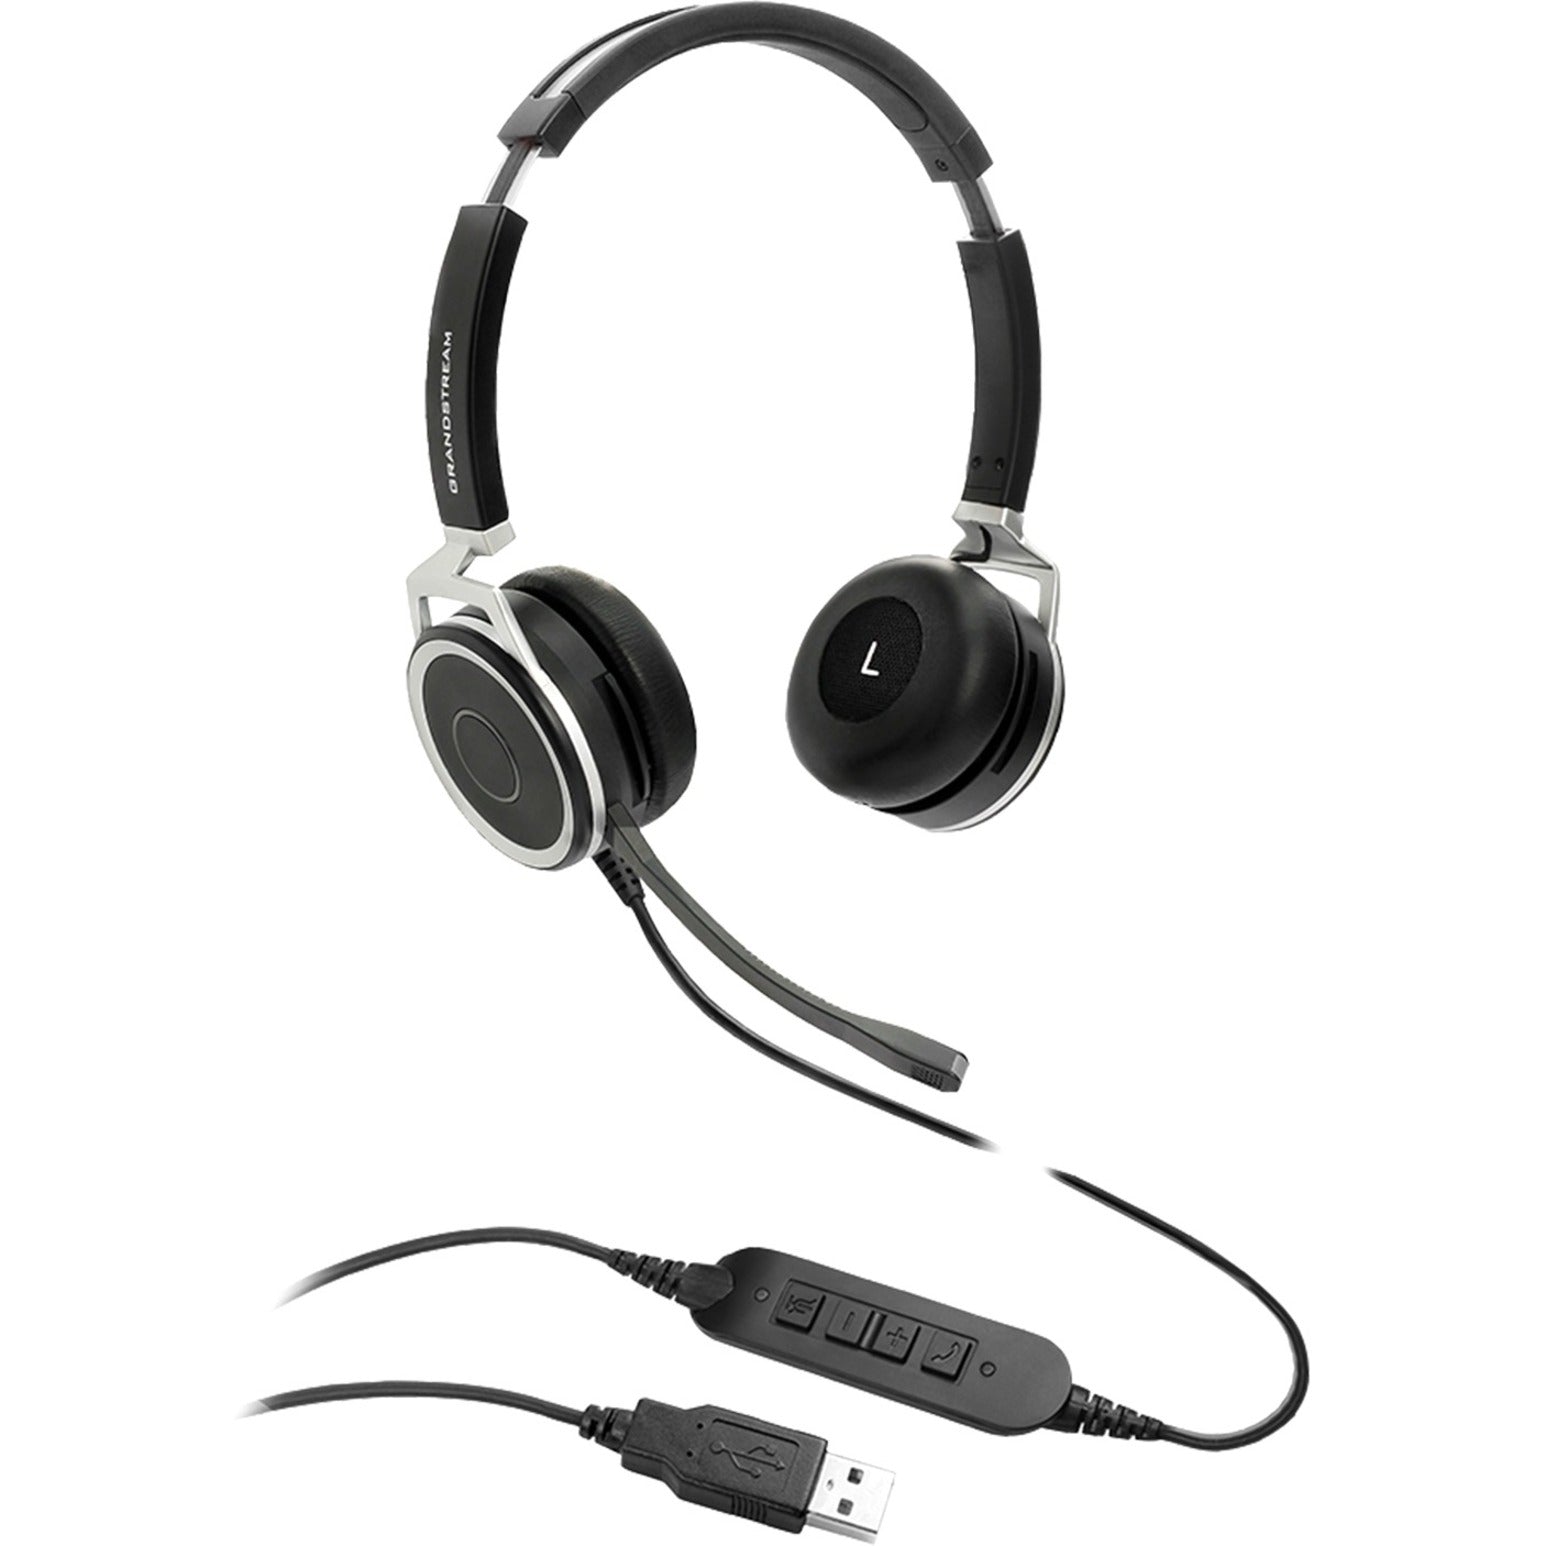 Grandstream GUV3005 Headset, Comfortable, Noise Cancelling, USB Type A